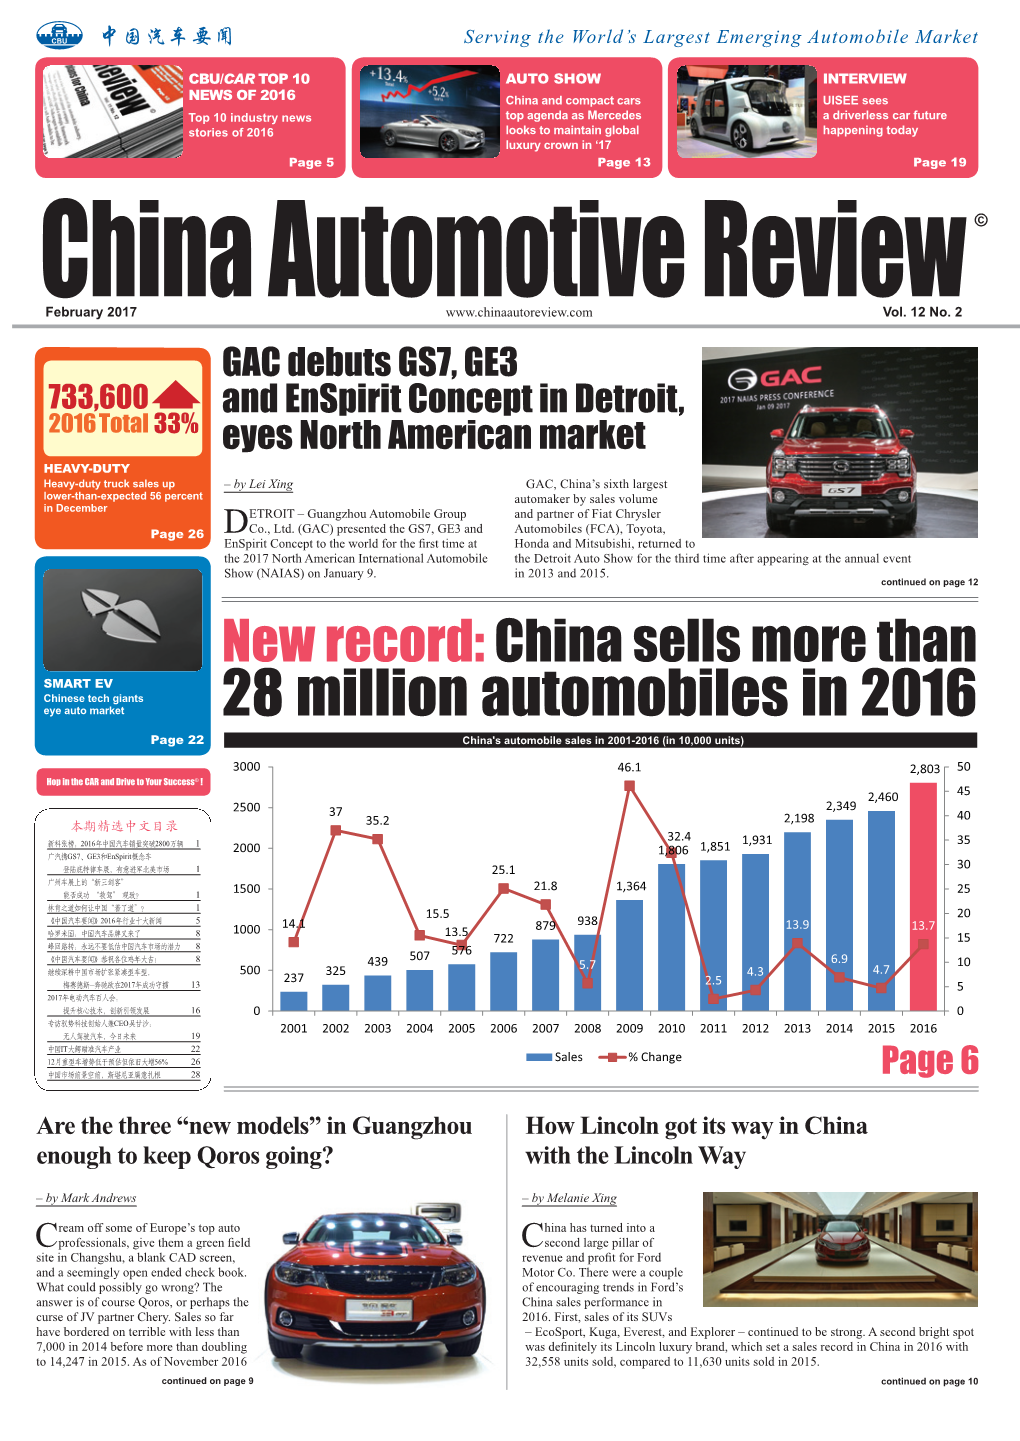 28 Million Automobiles in 2016 Page 22 China's Automobile Sales in 2001-2016 (In 10,000 Units)